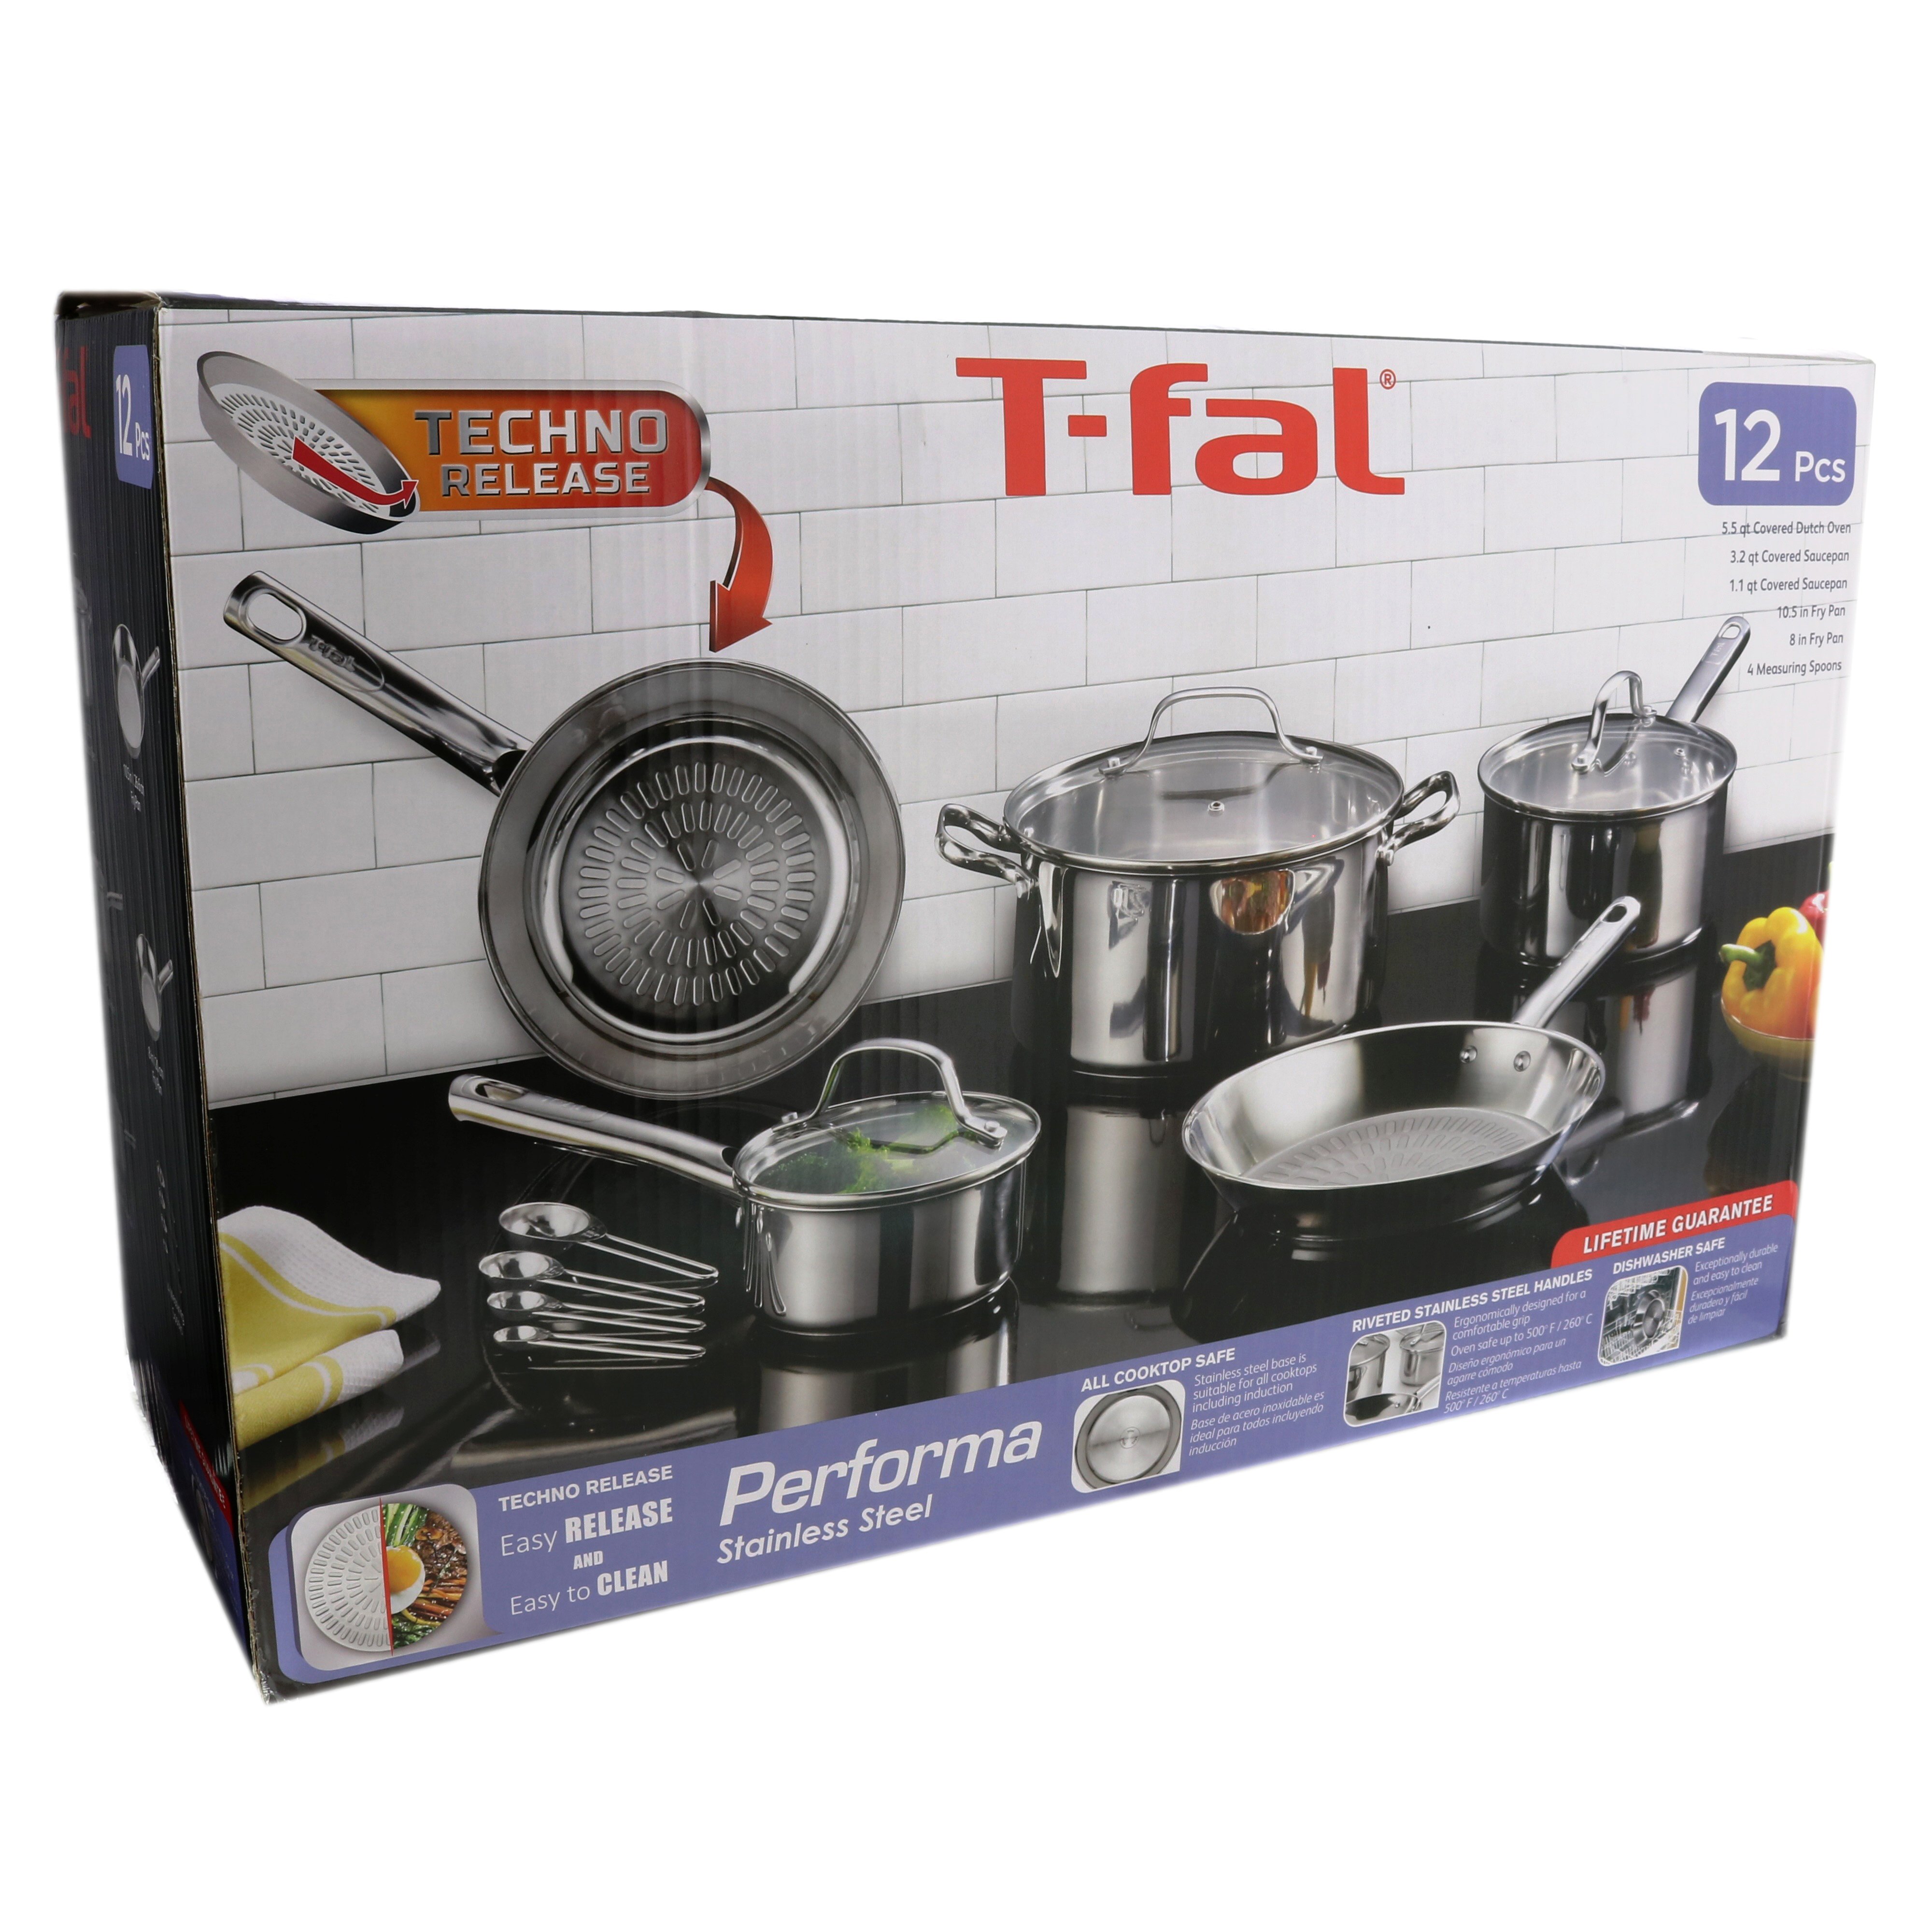 T-fal Performa Stainless Steel Cookware Set - Shop Kitchen & Dining at H-E-B